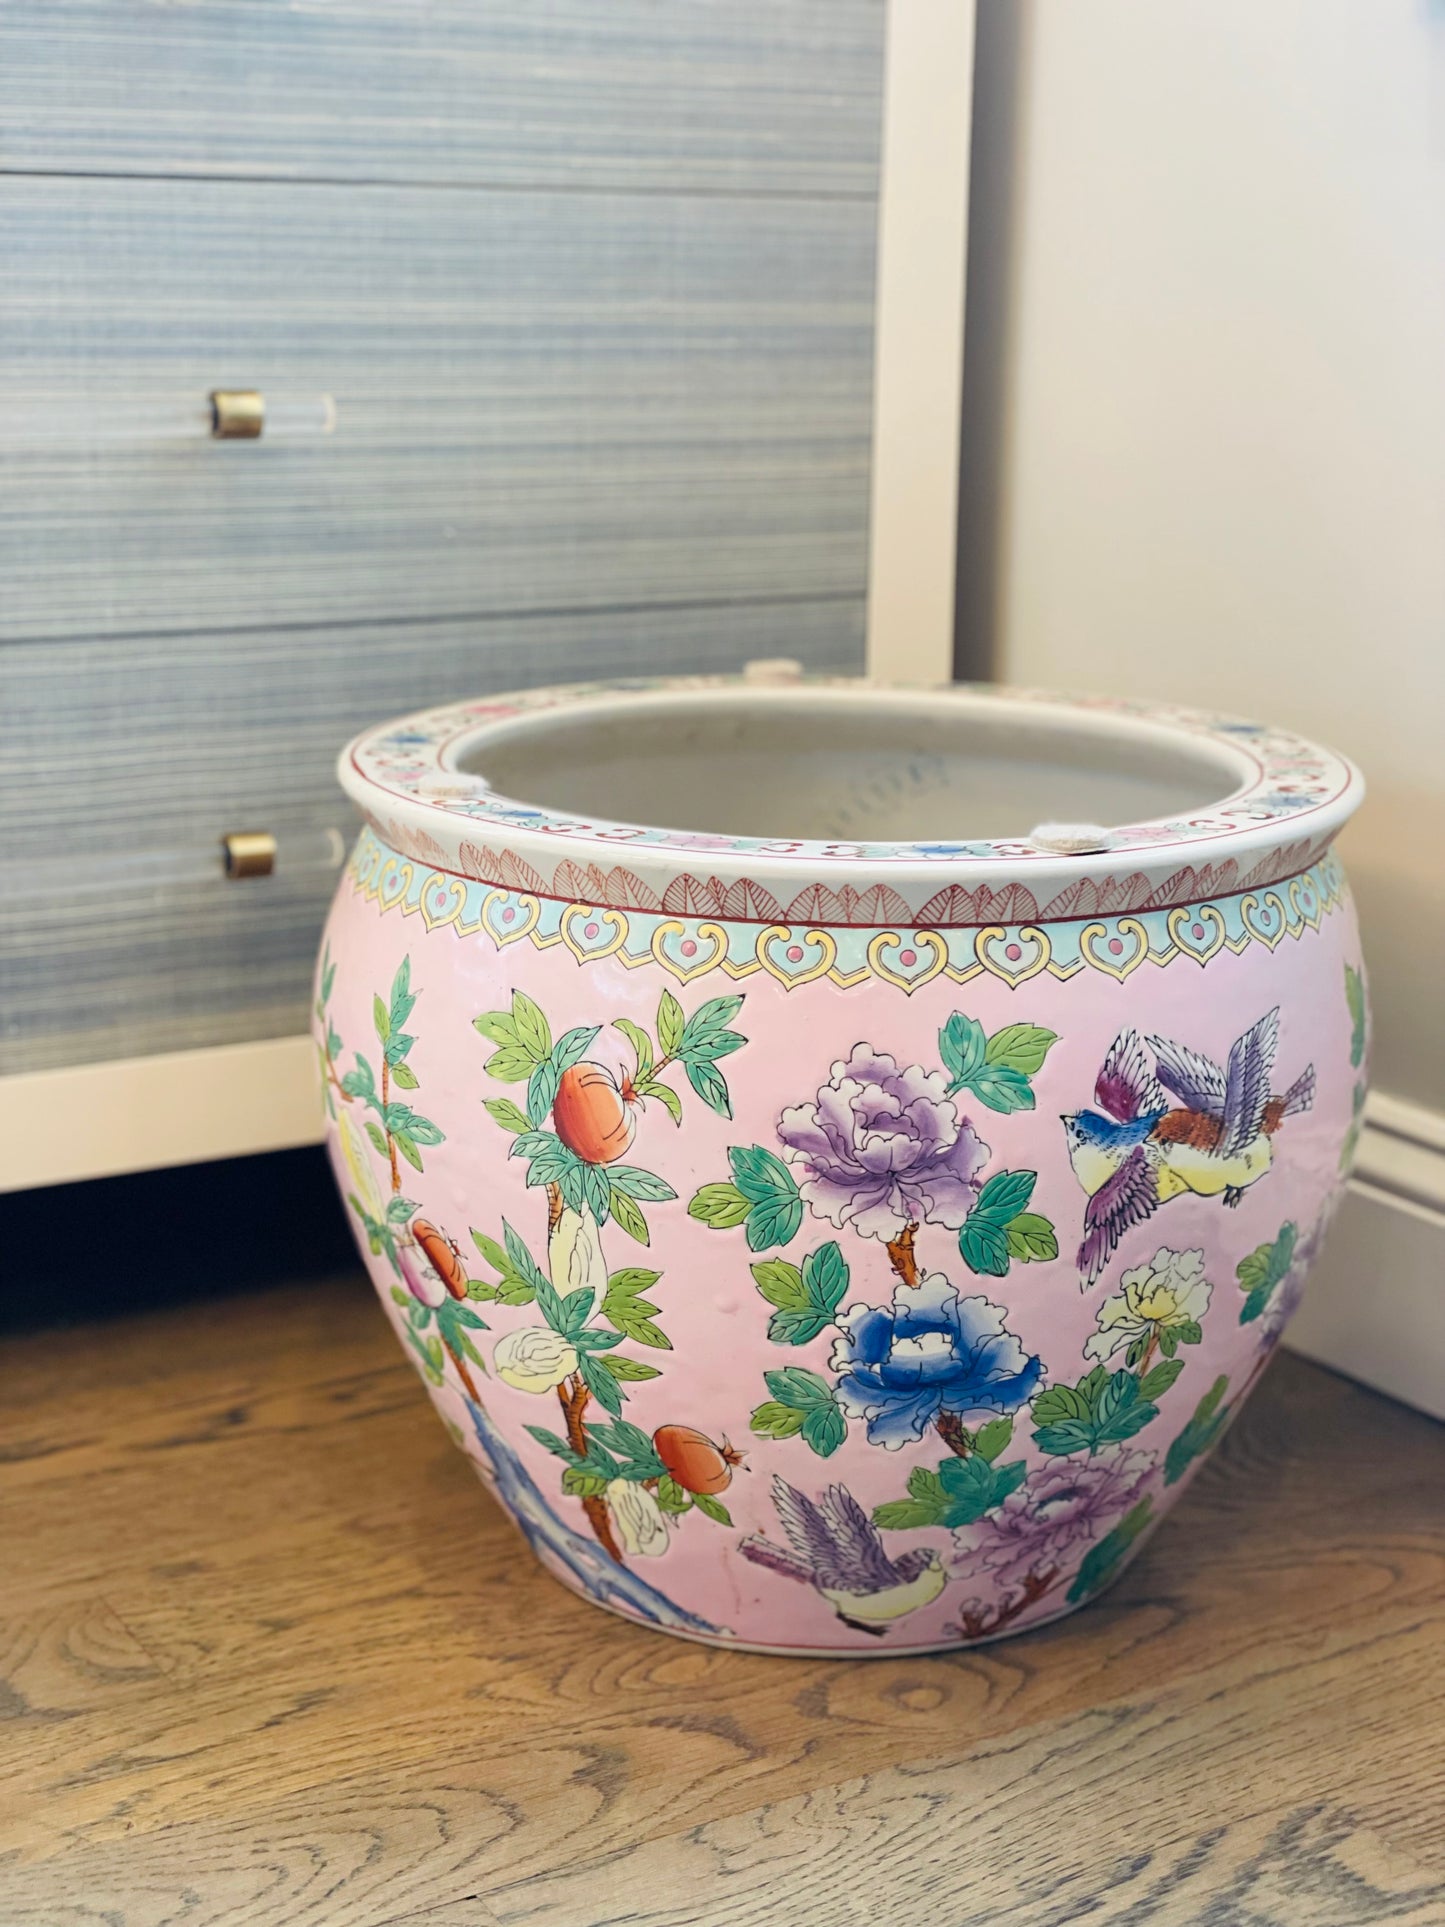 Vintage Pink Floral Peony Chinoiserie, 14.5”D Planter - Pristine